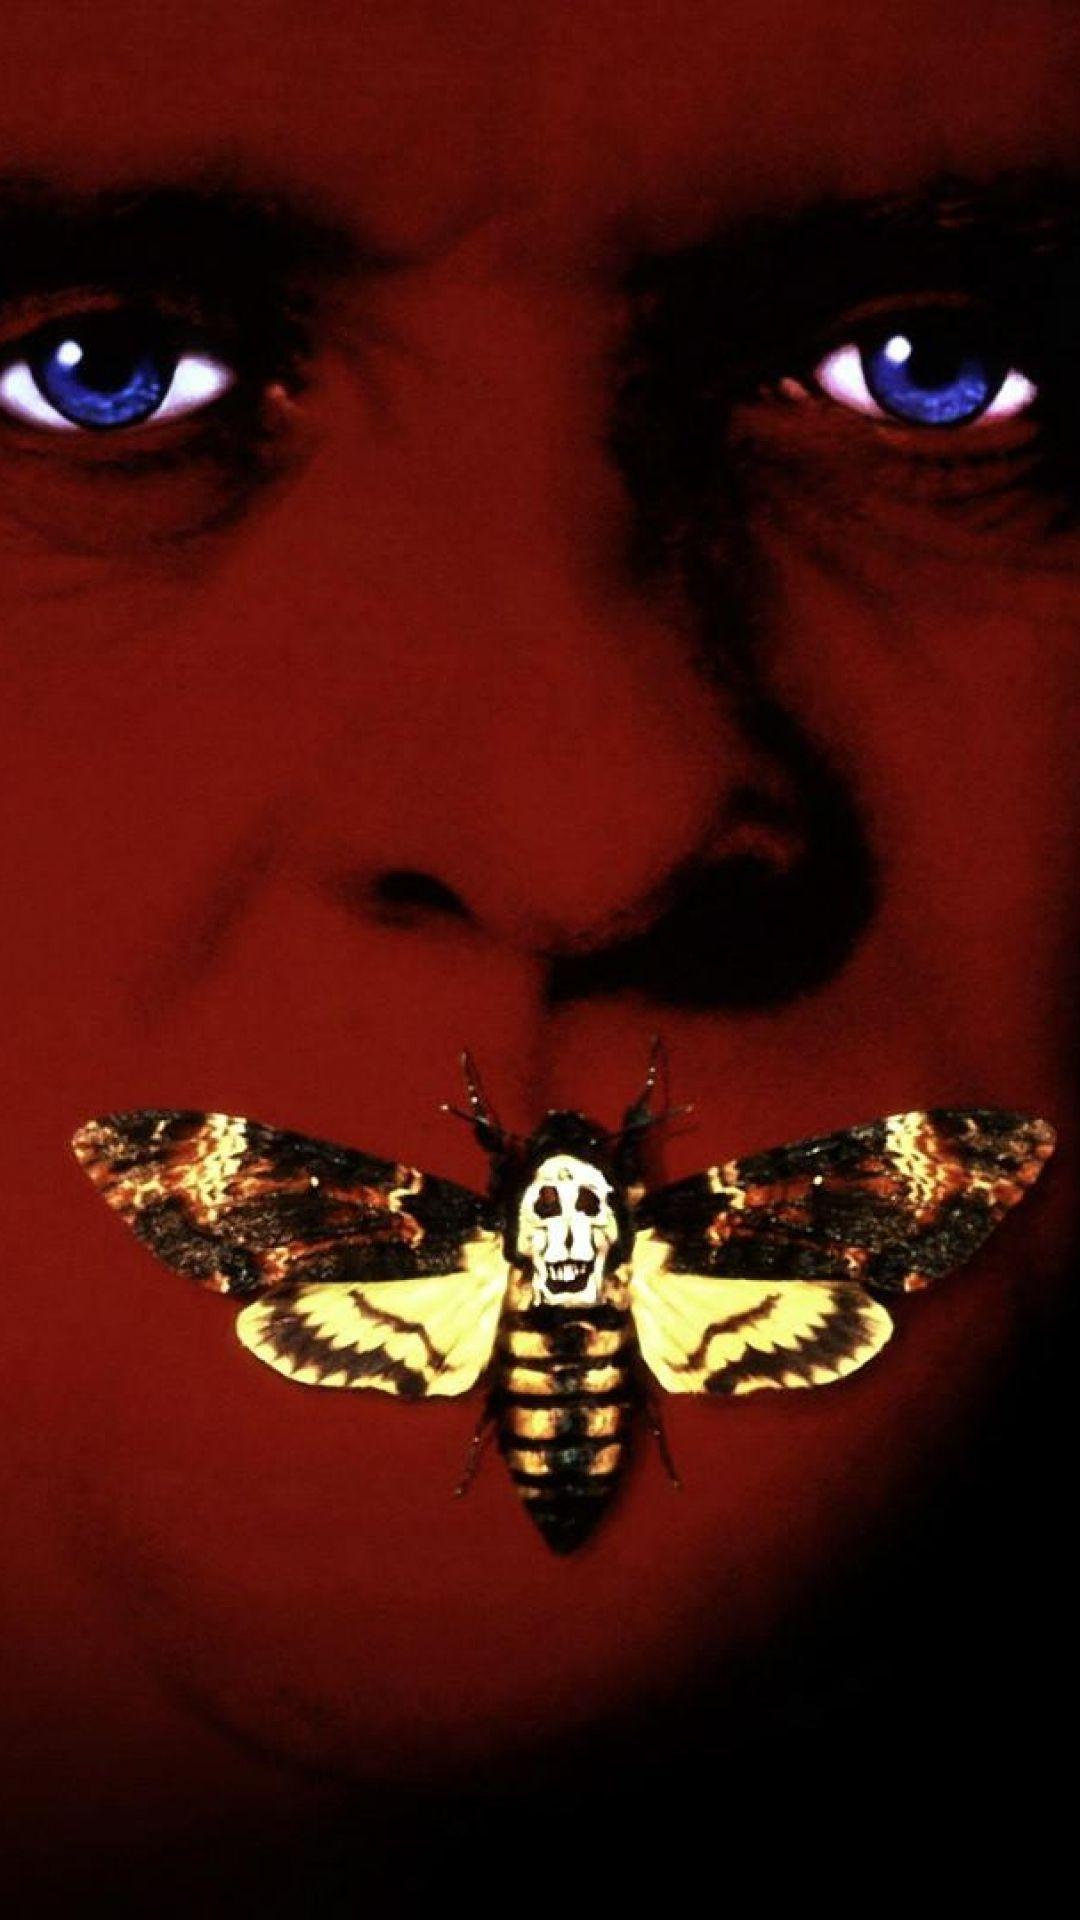 Download Wallpaper 1080x1920 The silence of the lambs, Butterflies